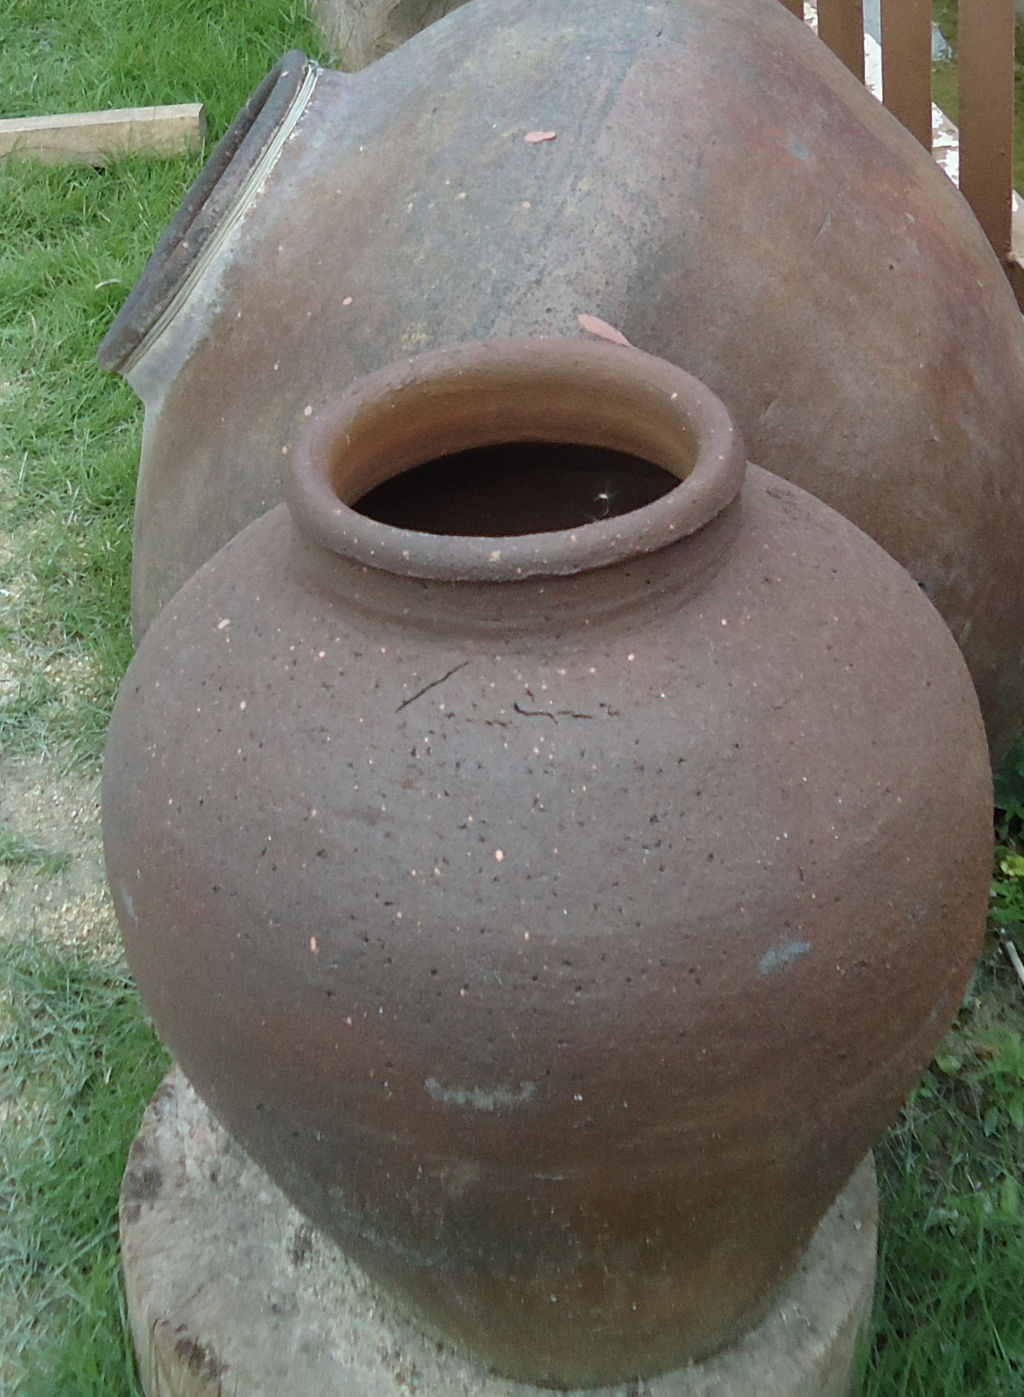 23 Nice Global Views Ovoid Vase 2024 free download global views ovoid vase of art of the philippines wikipedia intended for burnay tapayan jars used as lawn ornaments